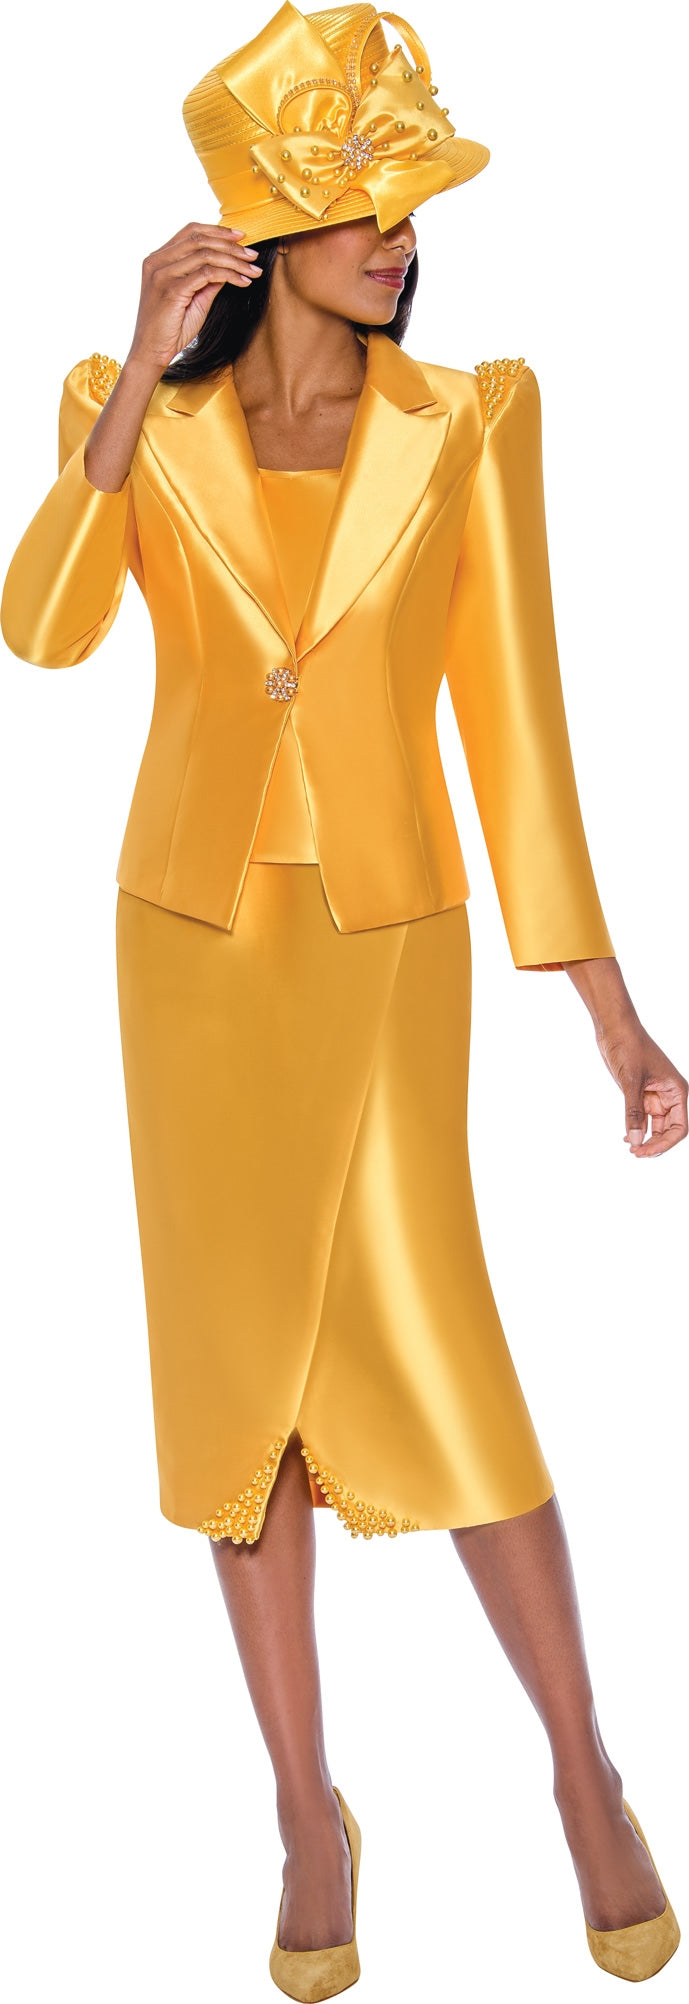 GMI Church Suit 9263-Gold - Church Suits For Less